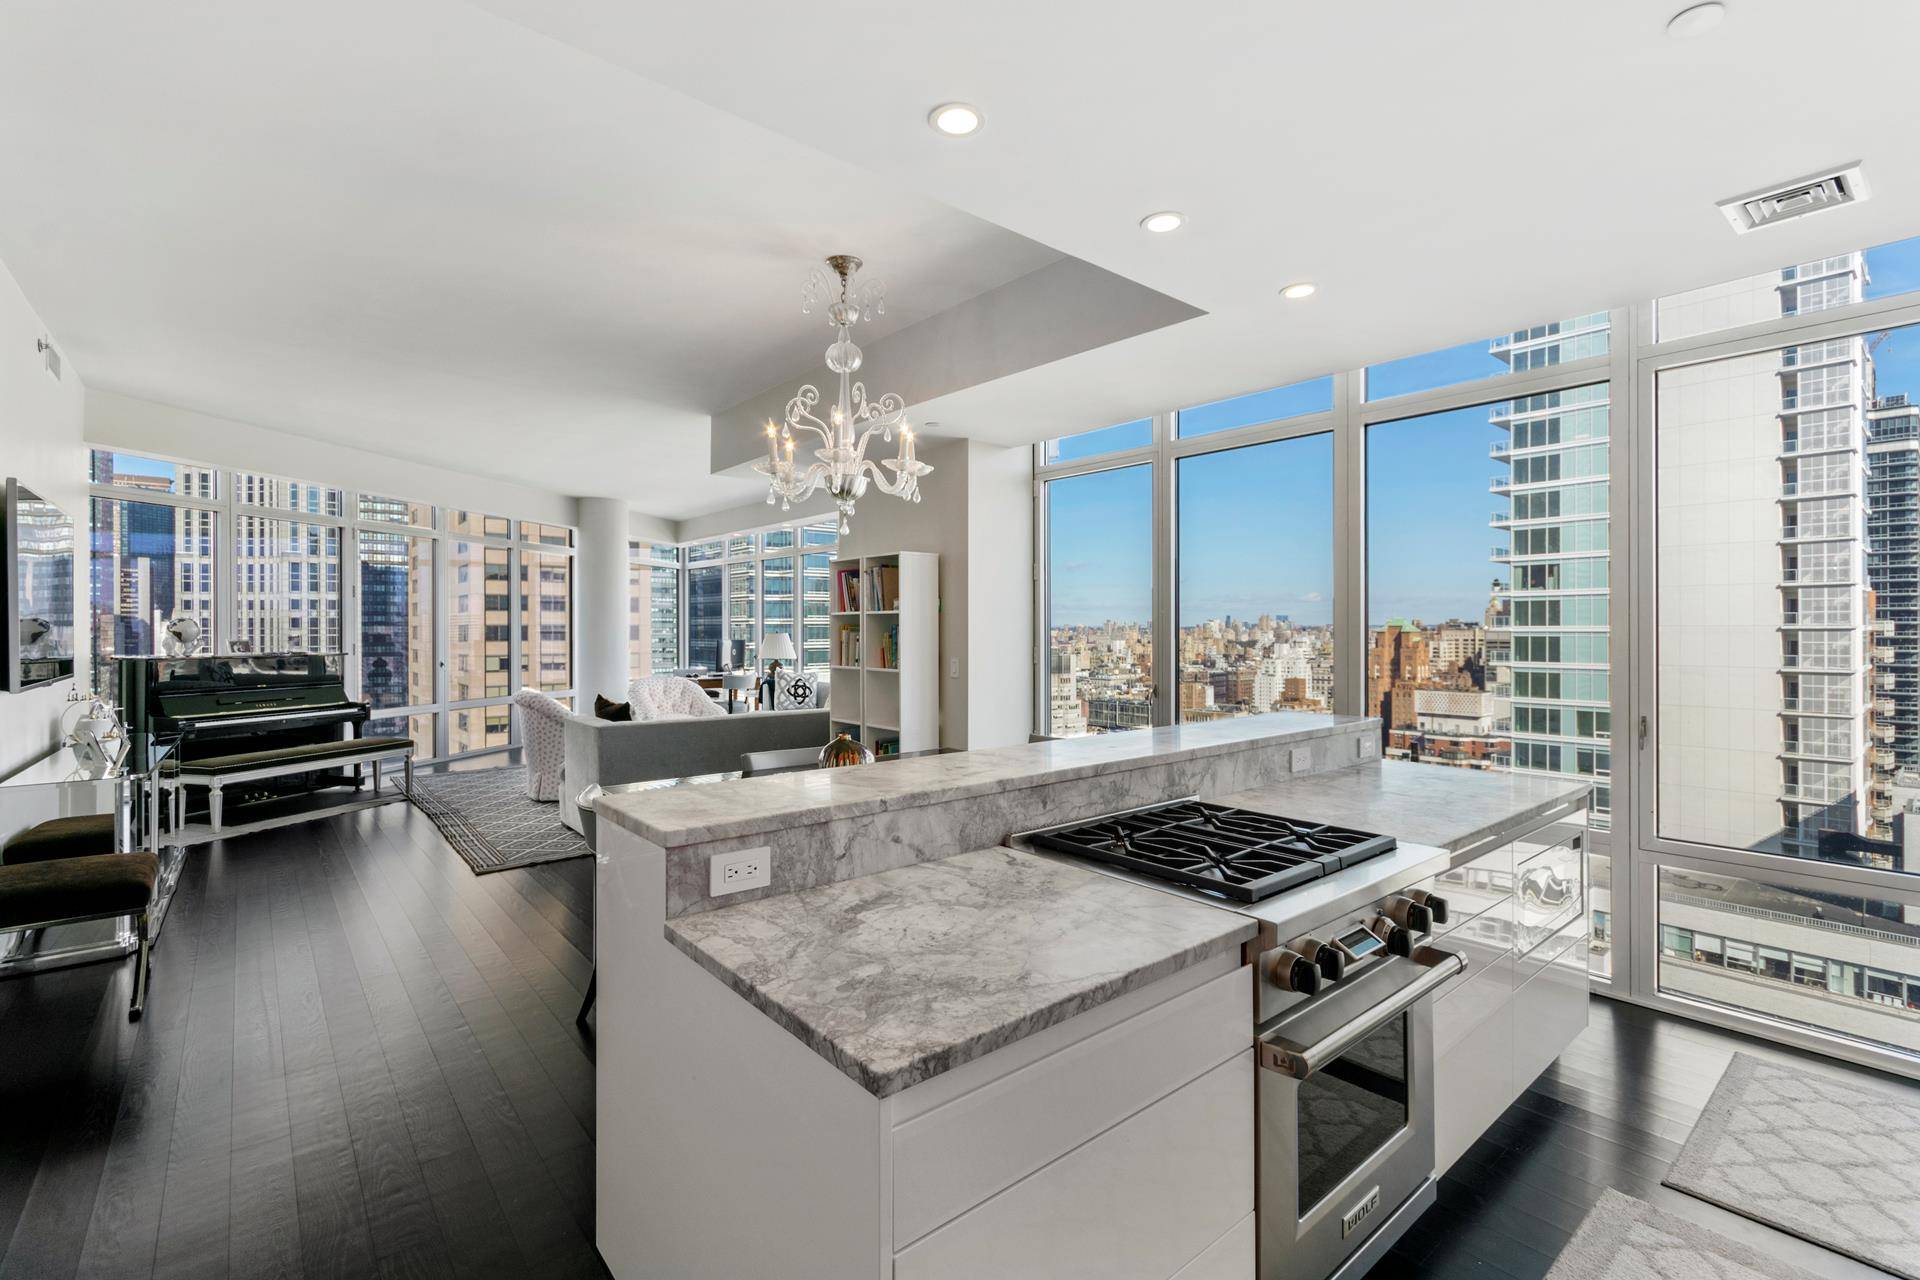 Spectacular open city views from every room of this magnificent mint true 3 Bedroom home with natural light and double exposure from floor to ceiling windows.